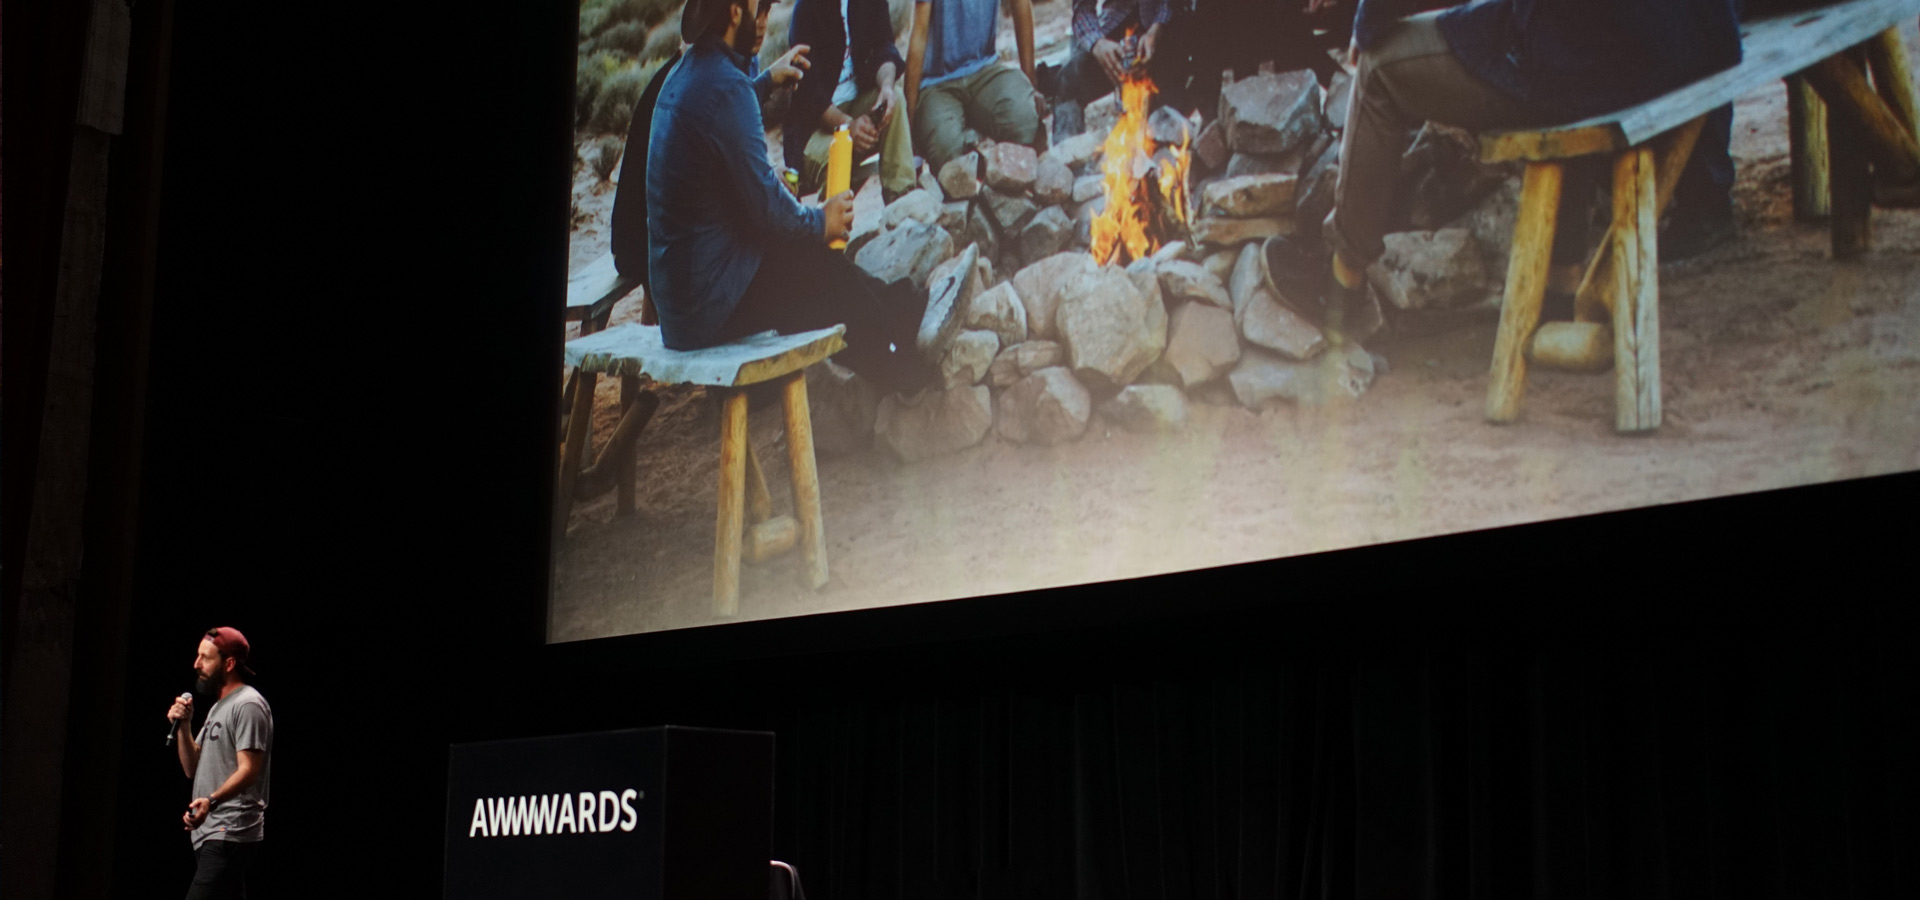 How I Went From Attendee to Closing the Conference - Dann Petty's Awwwards LA Story!